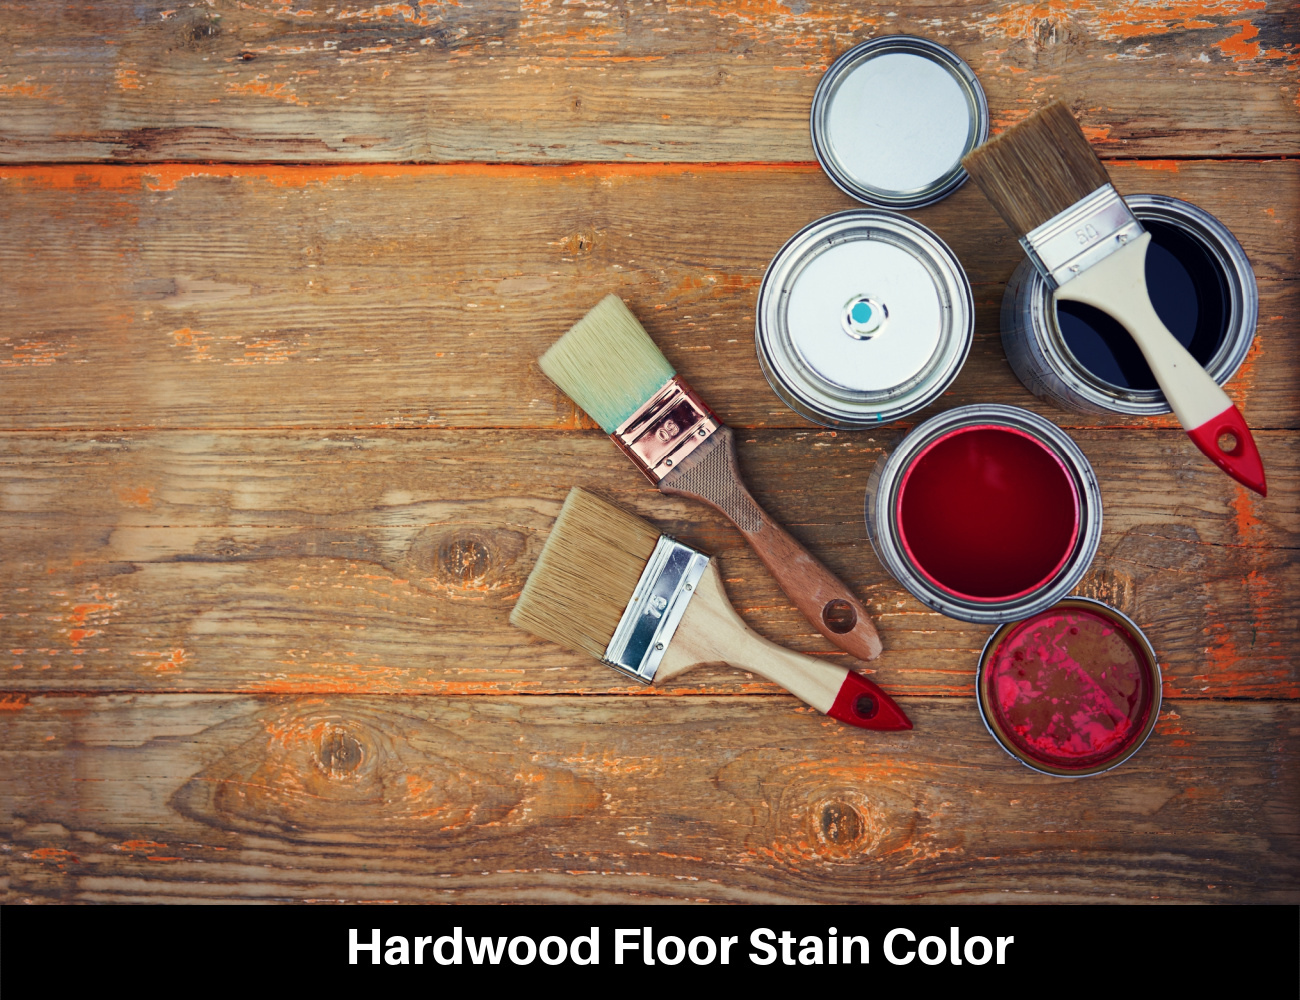 How to Choose the Best Hardwood Floor Stain Color